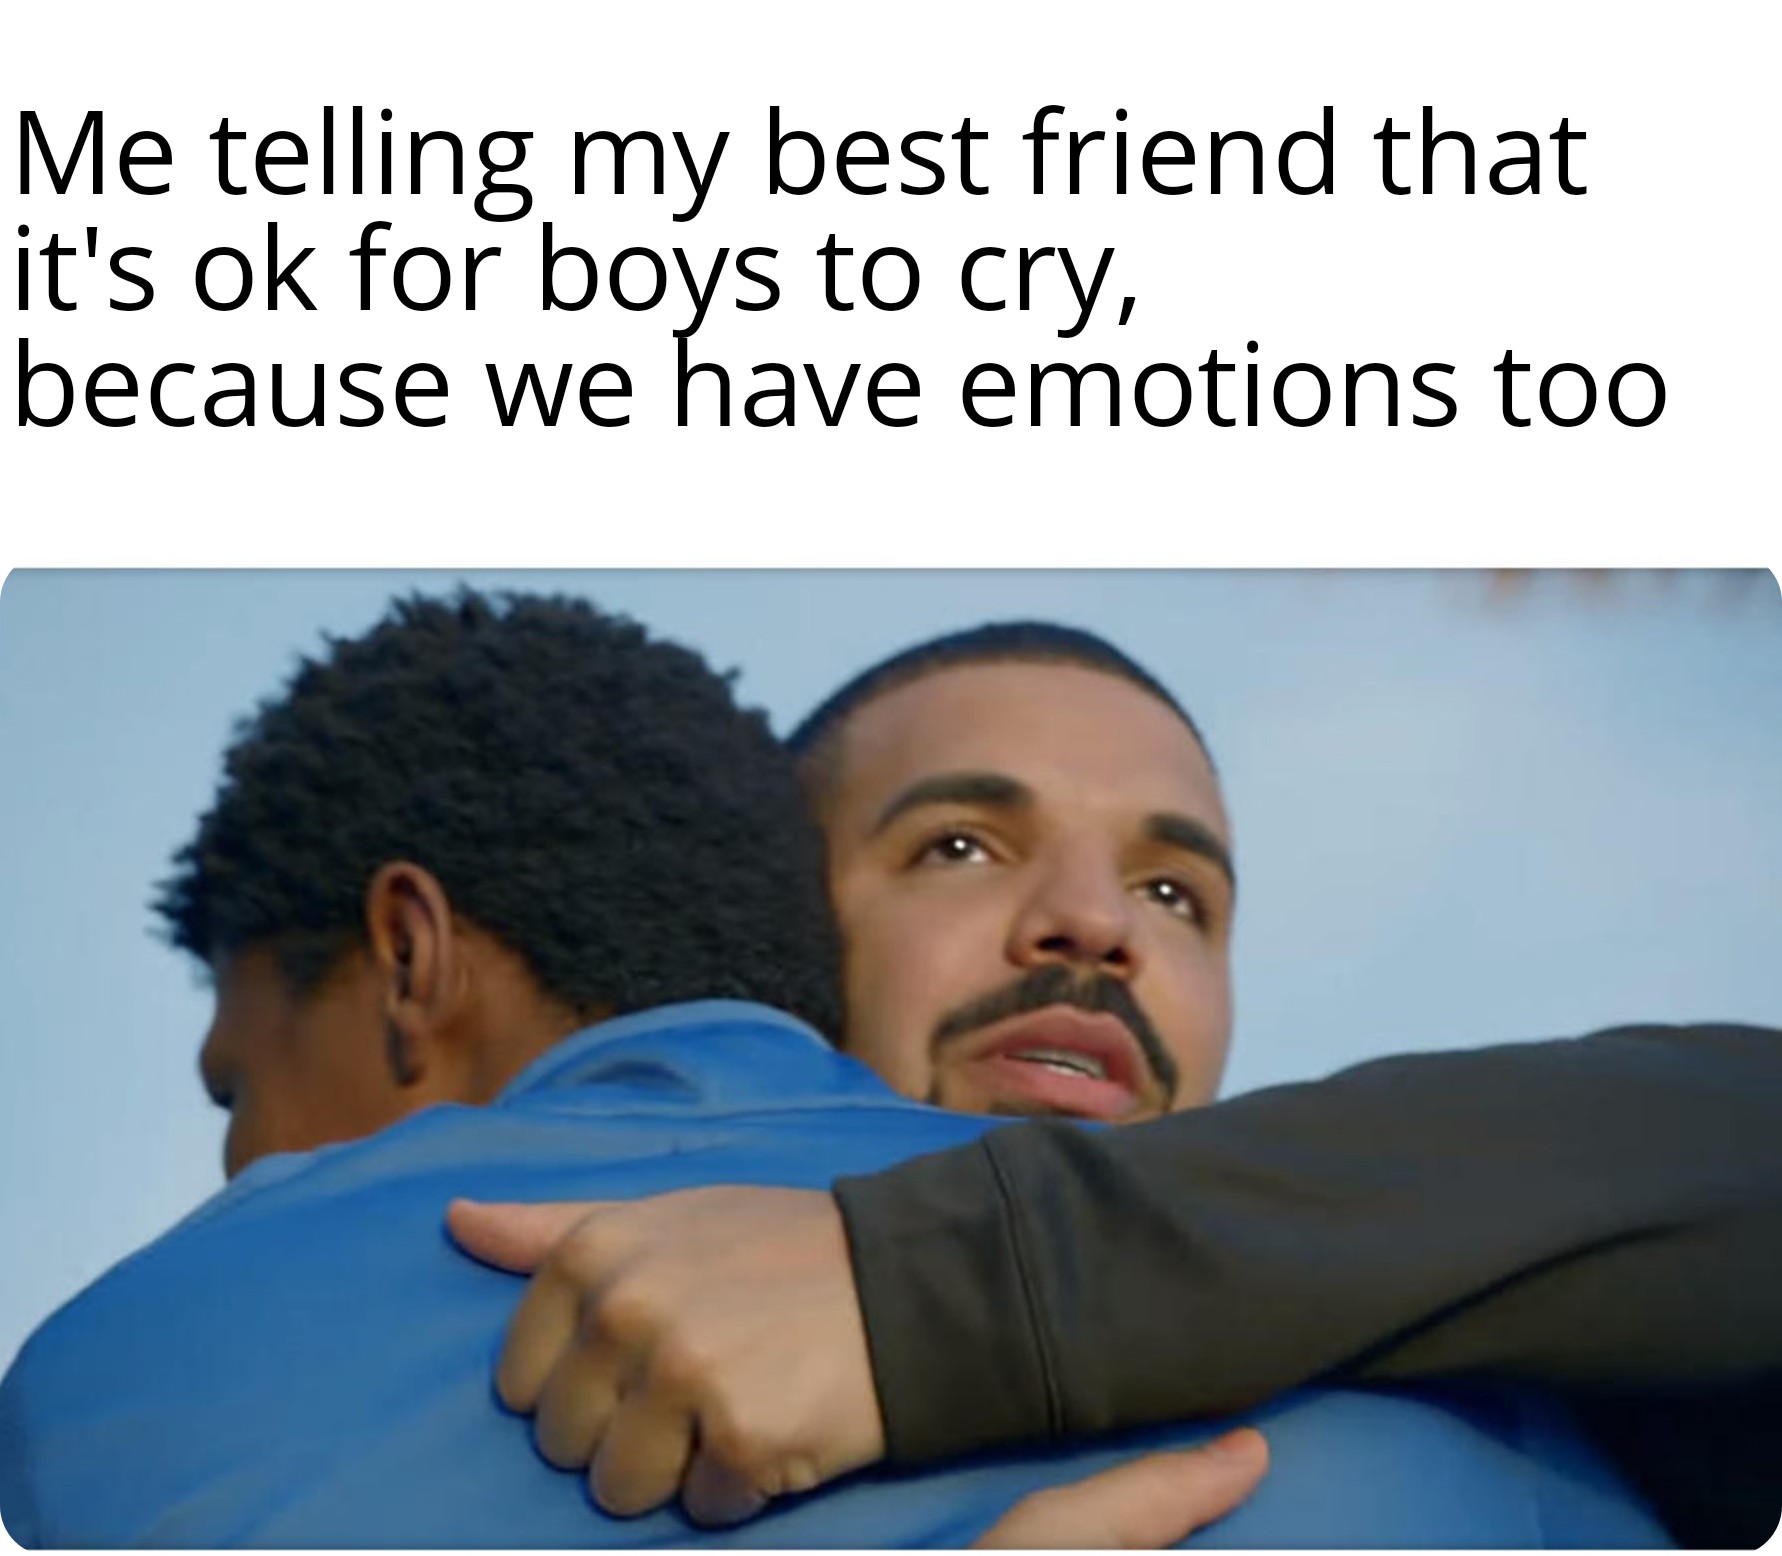 treaty of versailles memes - Me telling my best friend that it's ok for boys to cry, because we have emotions too